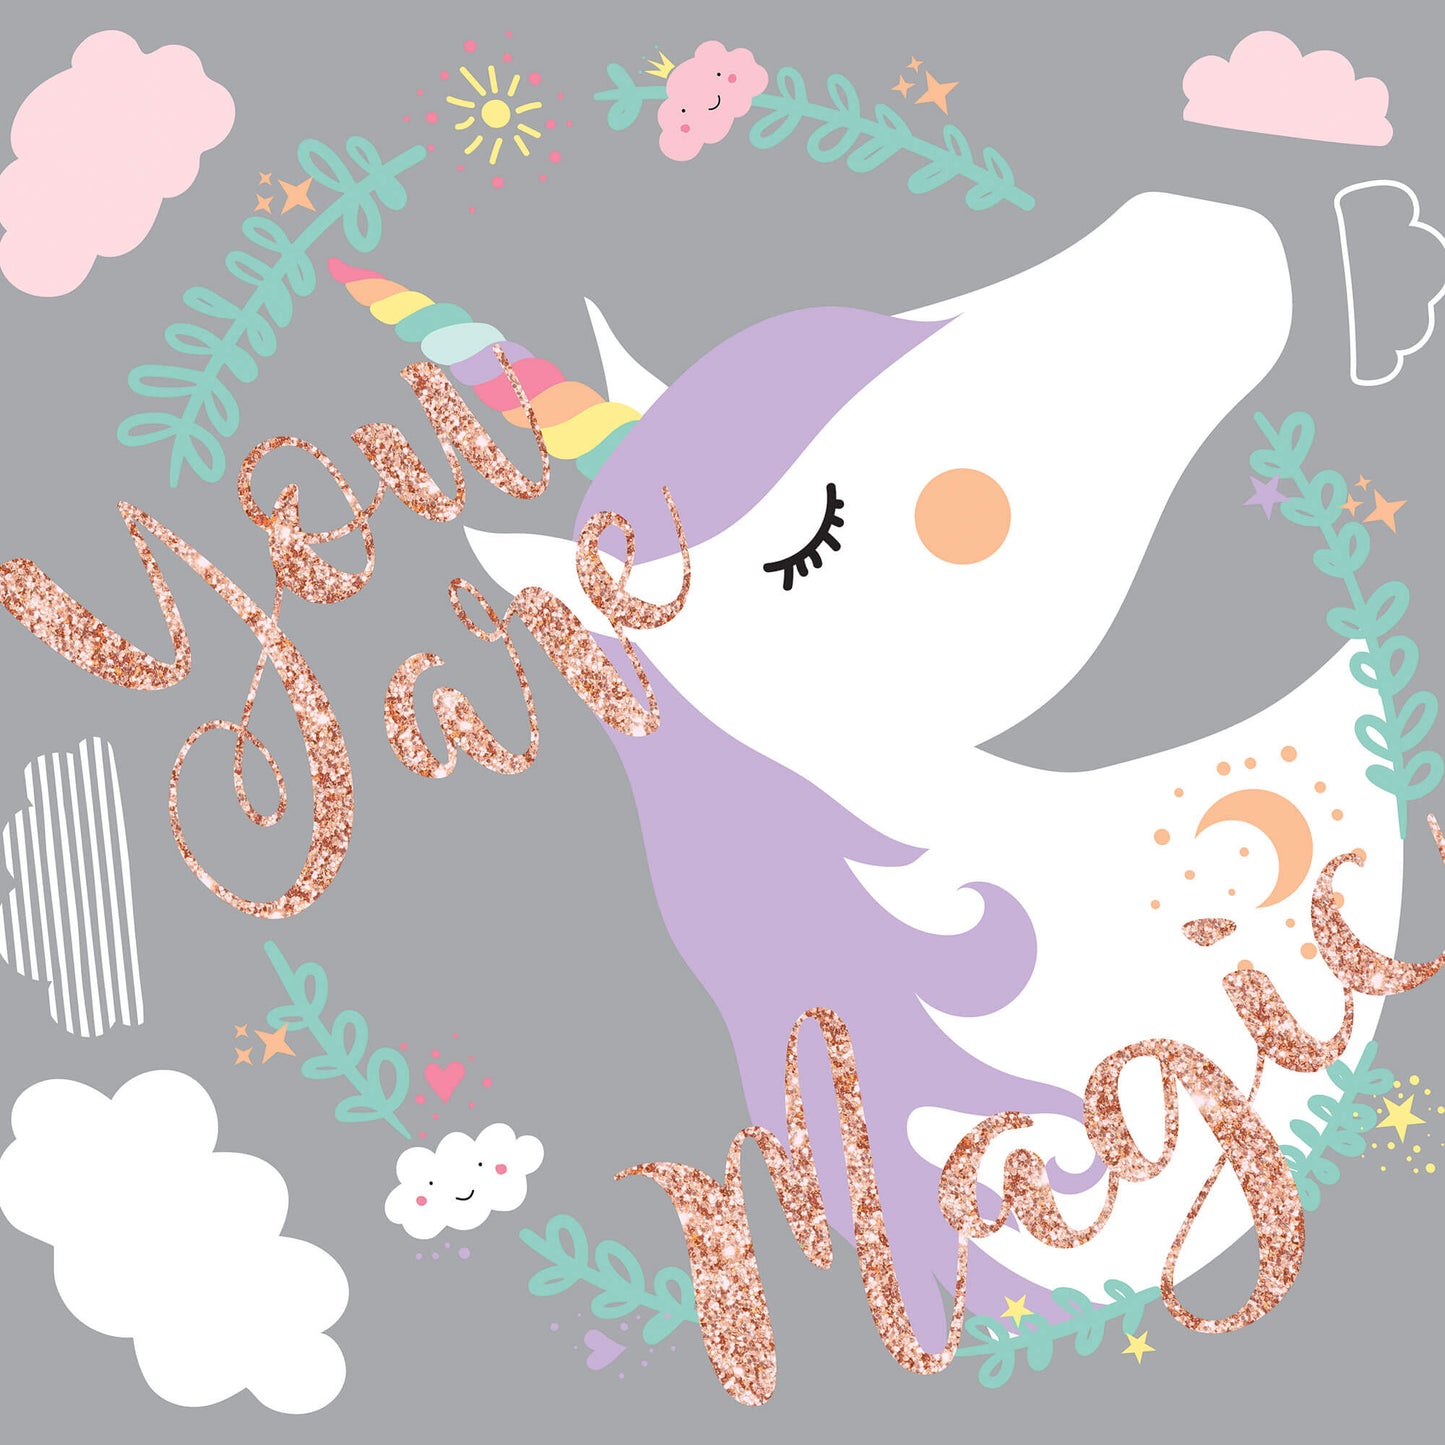 RMK3627GM Unicorn Magic Peel and Stick Wall Decals with Glitter